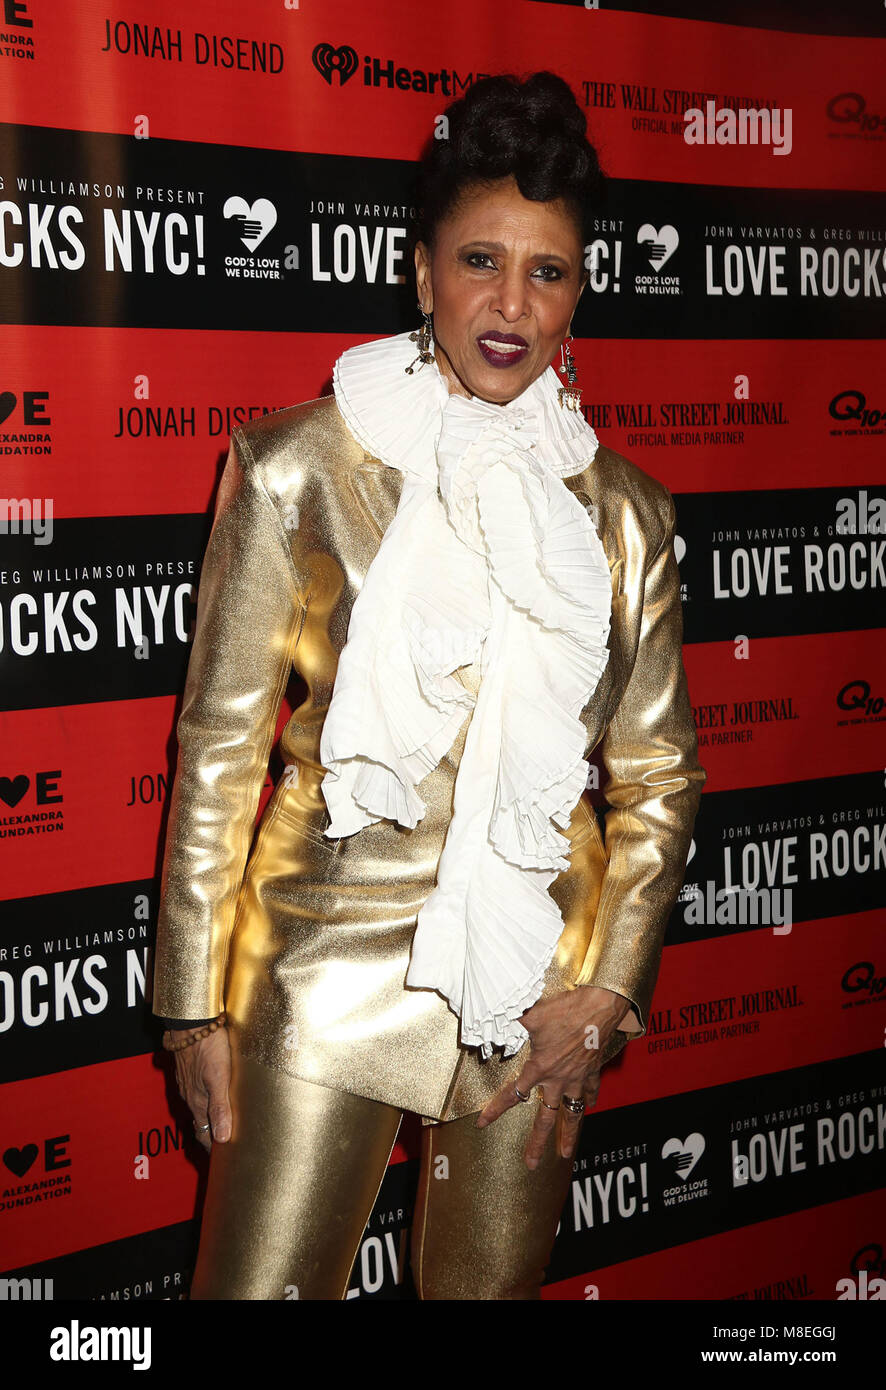 Nona Hendryx High Resolution Stock Photography and Images - Alamy